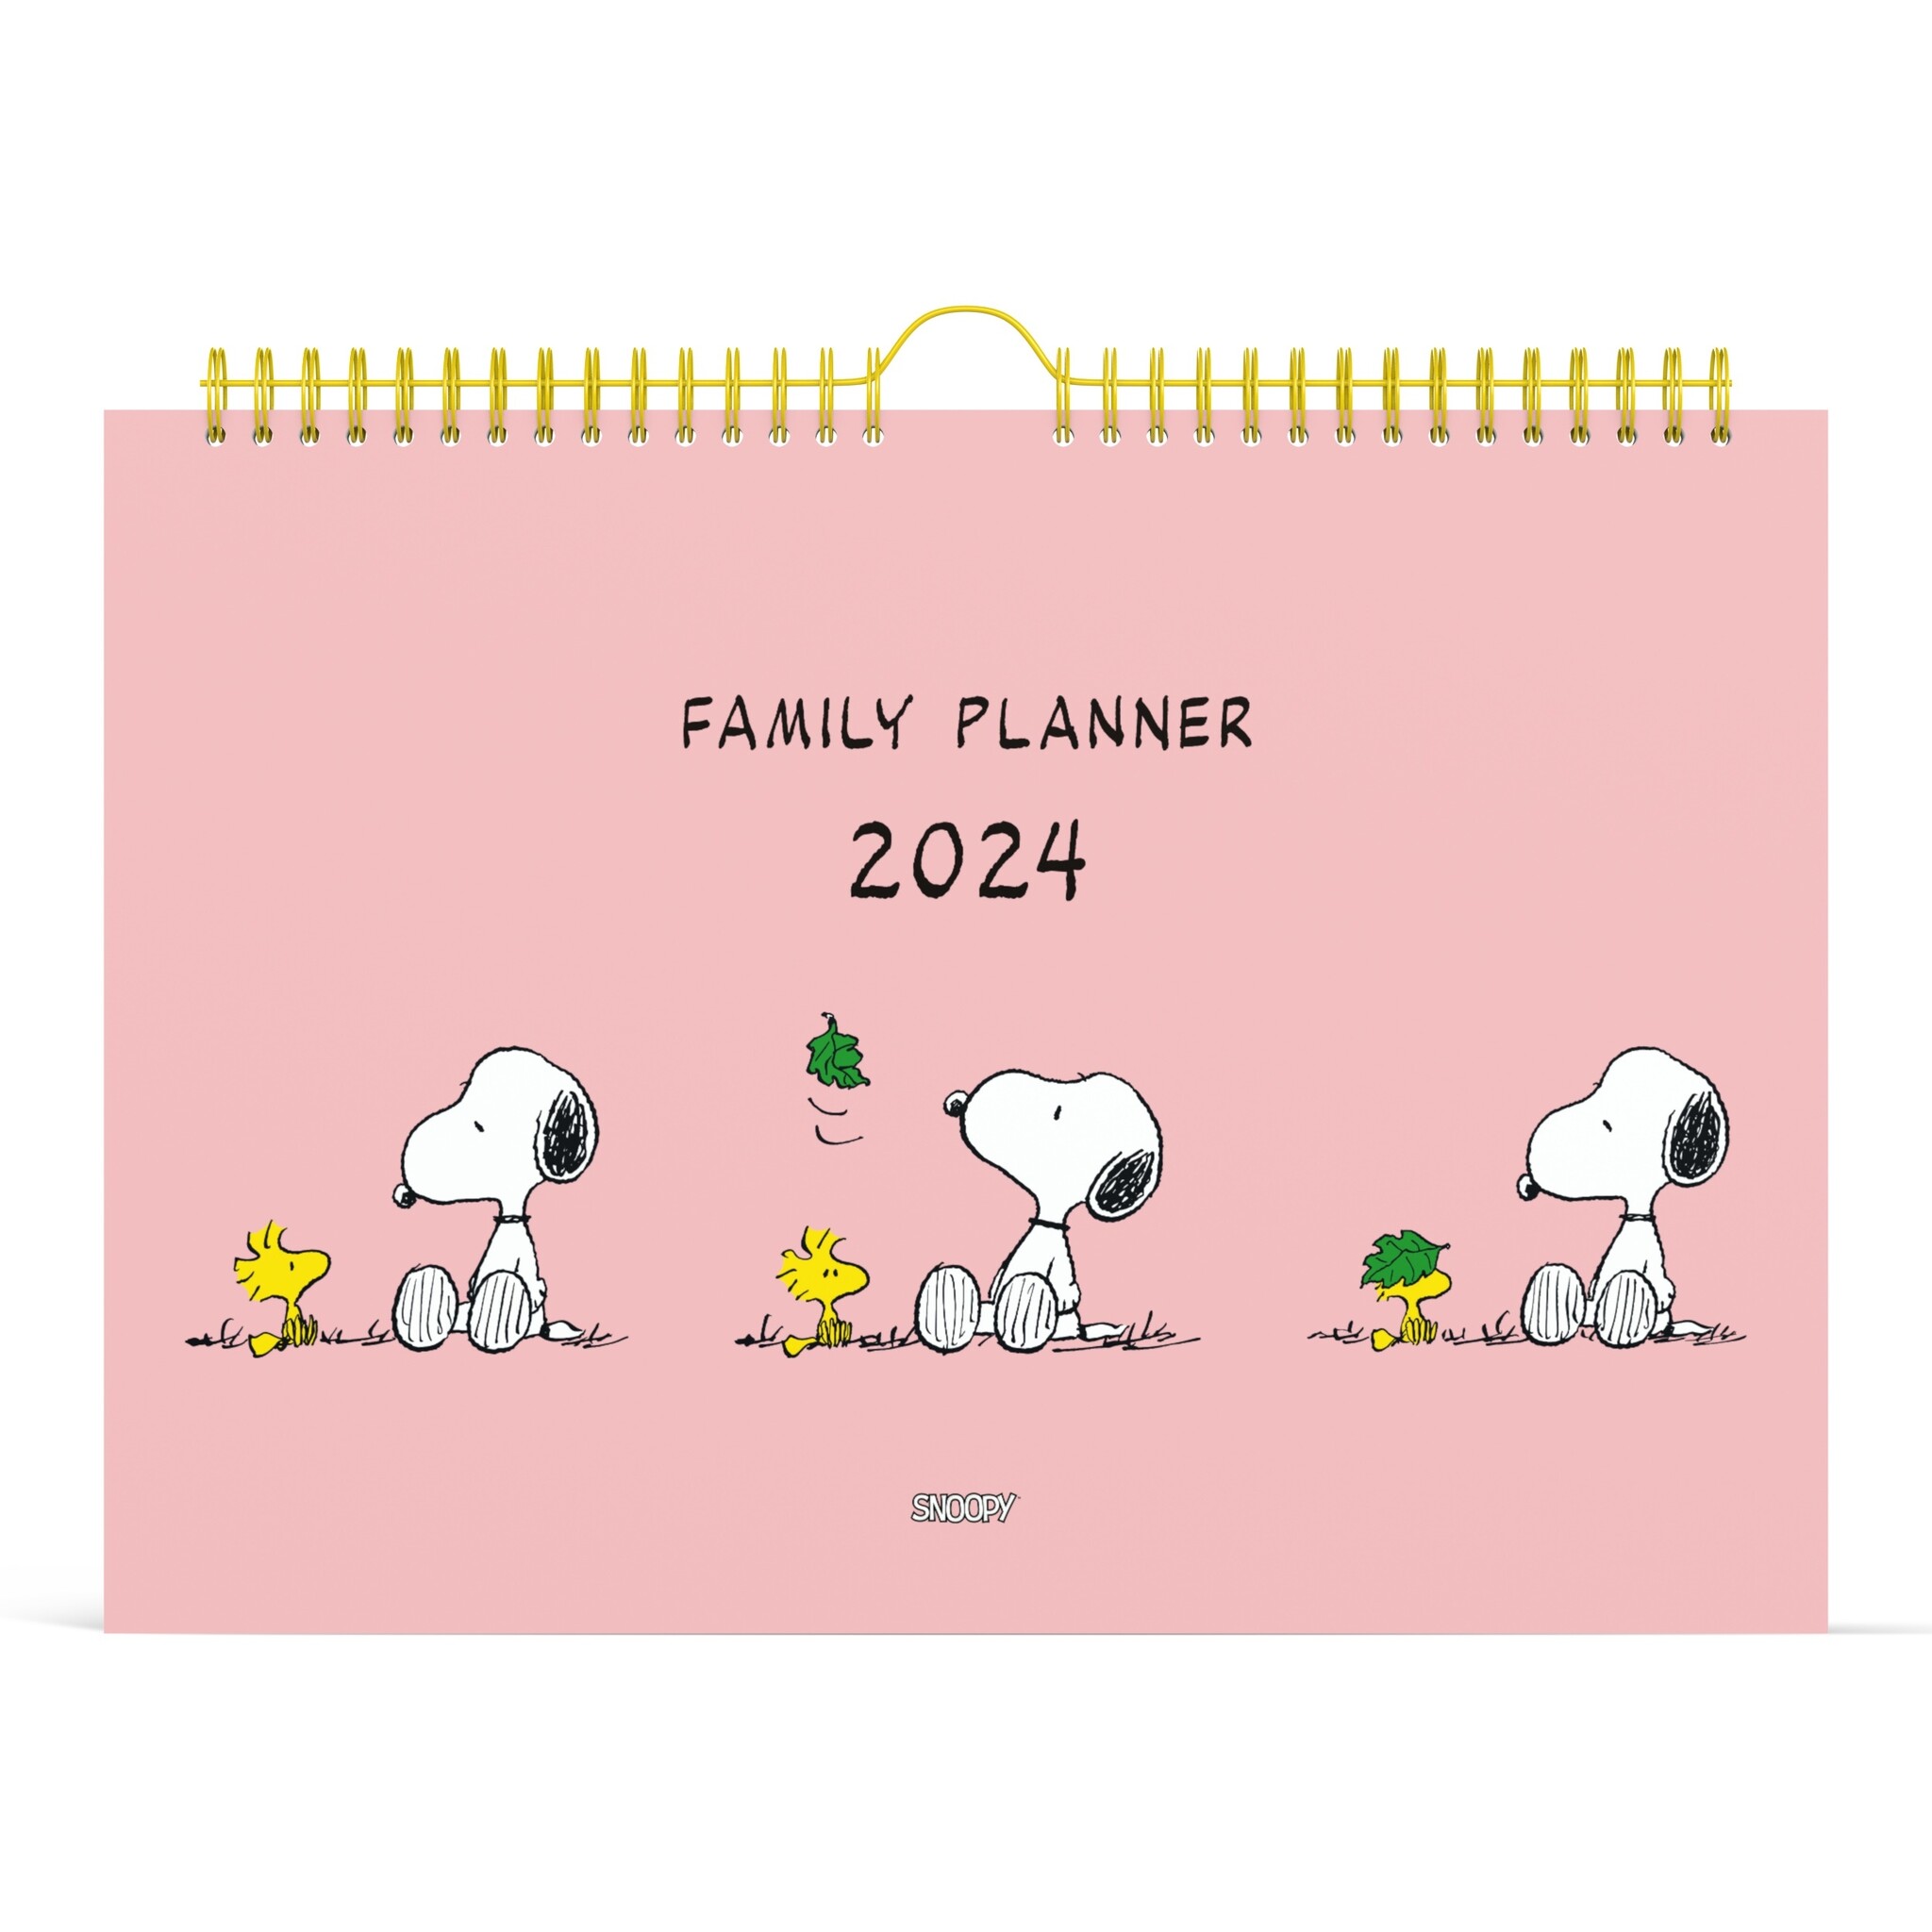 Snoopy - Peanuts Familieplanner 2024